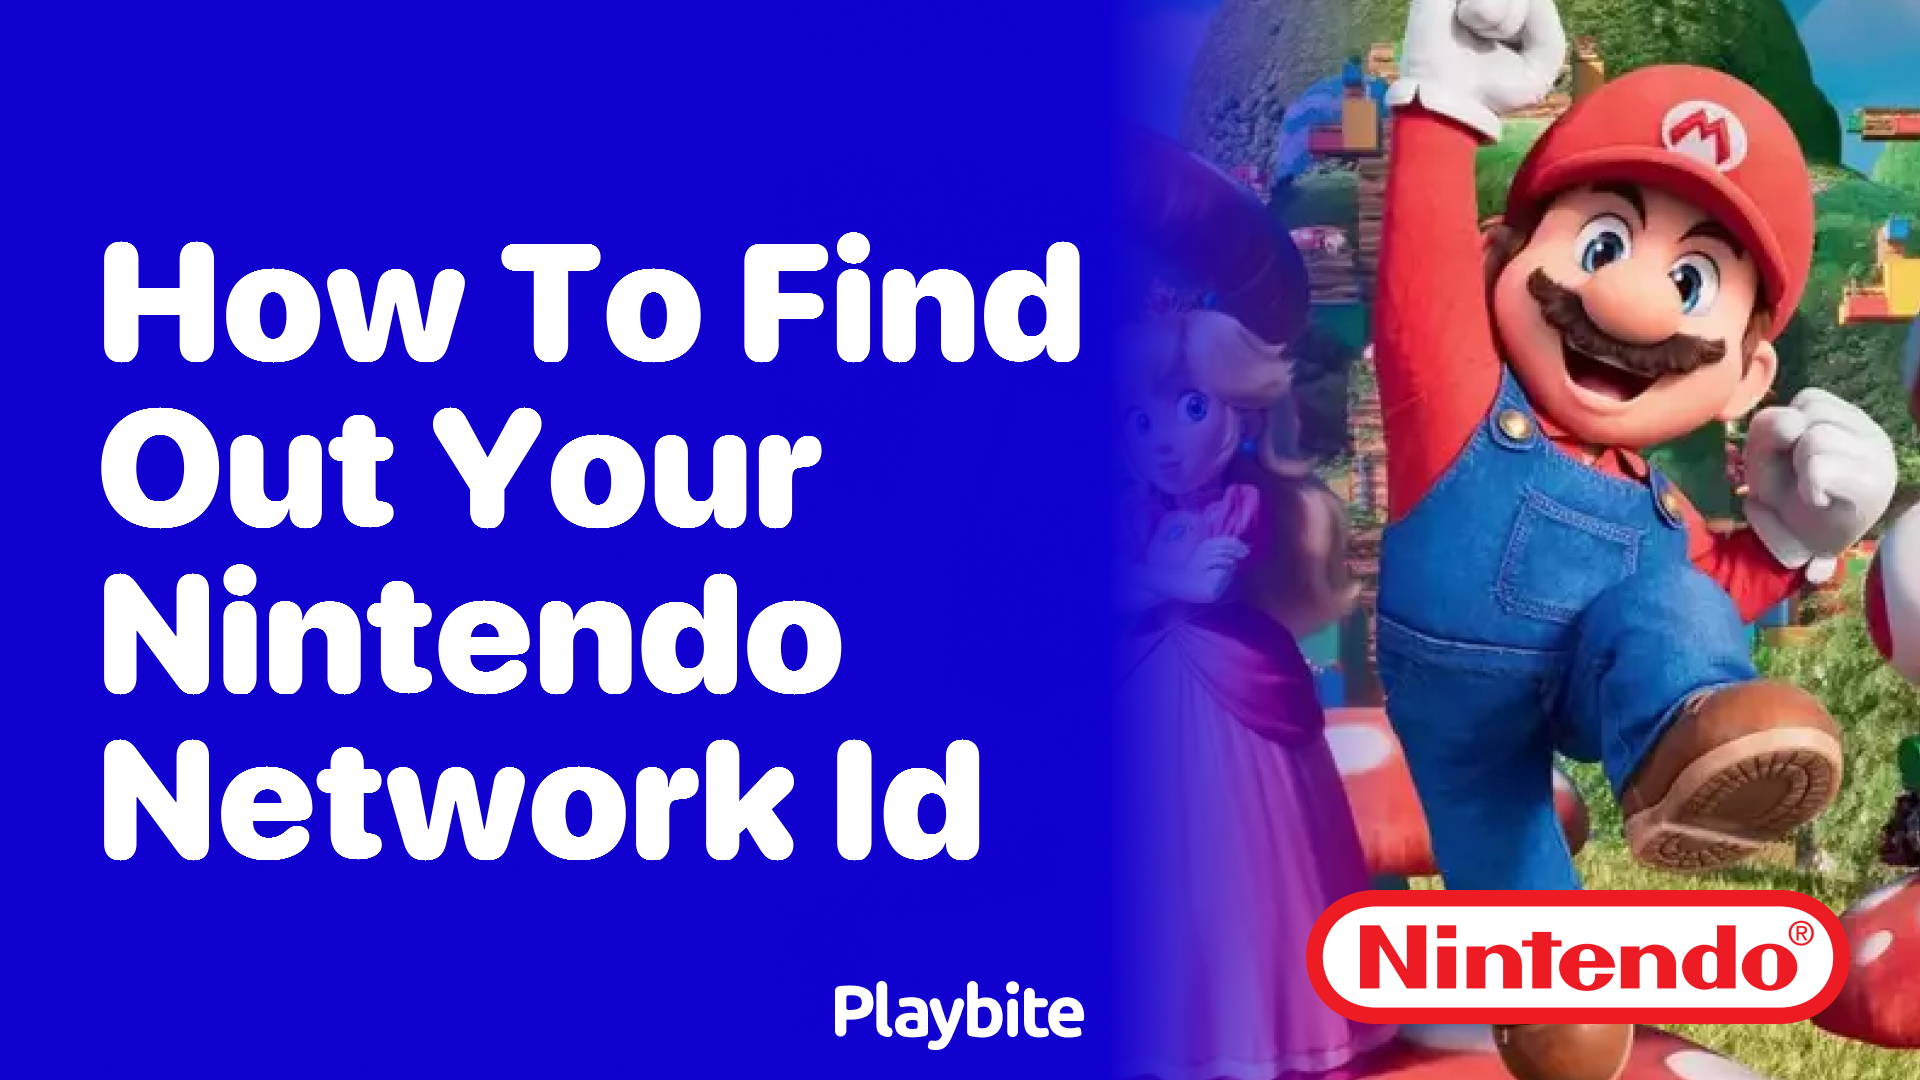 How to Find Out Your Nintendo Network ID